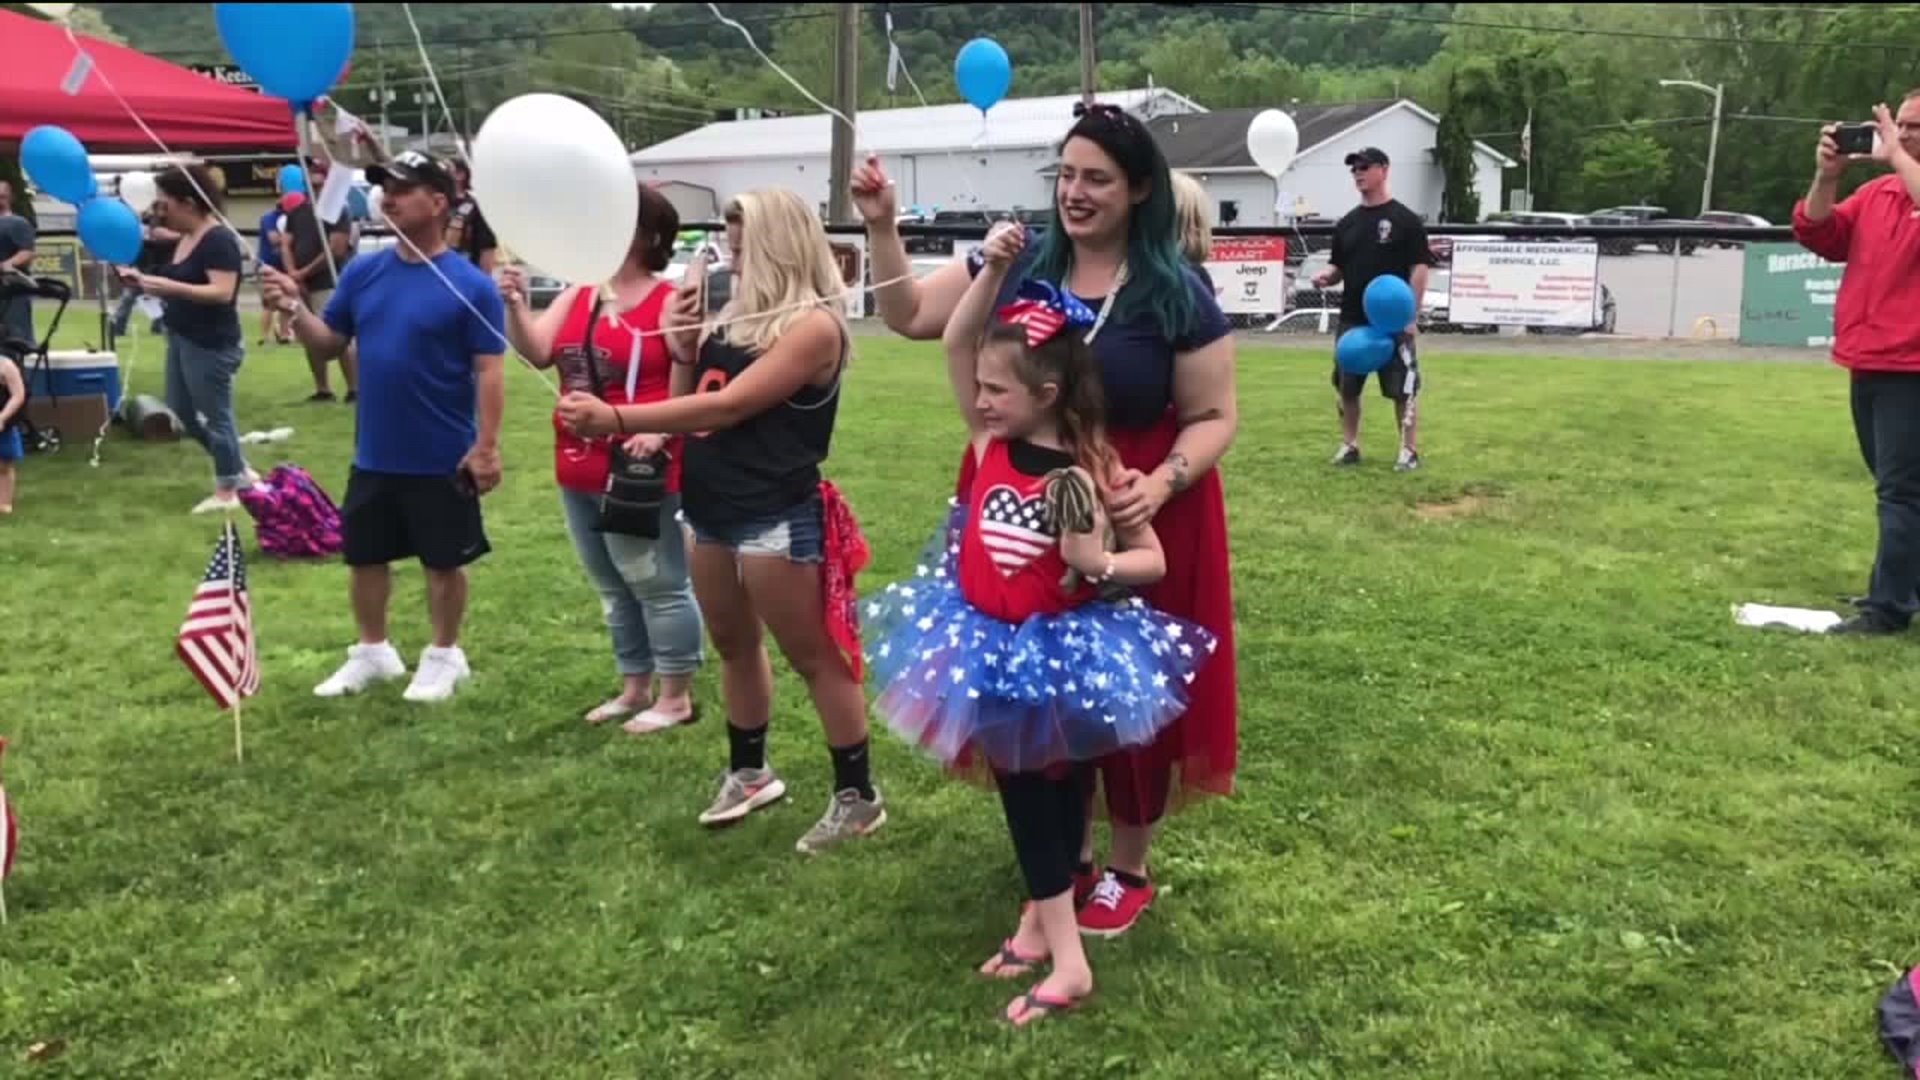 Soldiers Who Died in War Honored with Balloon Release in Wyoming County